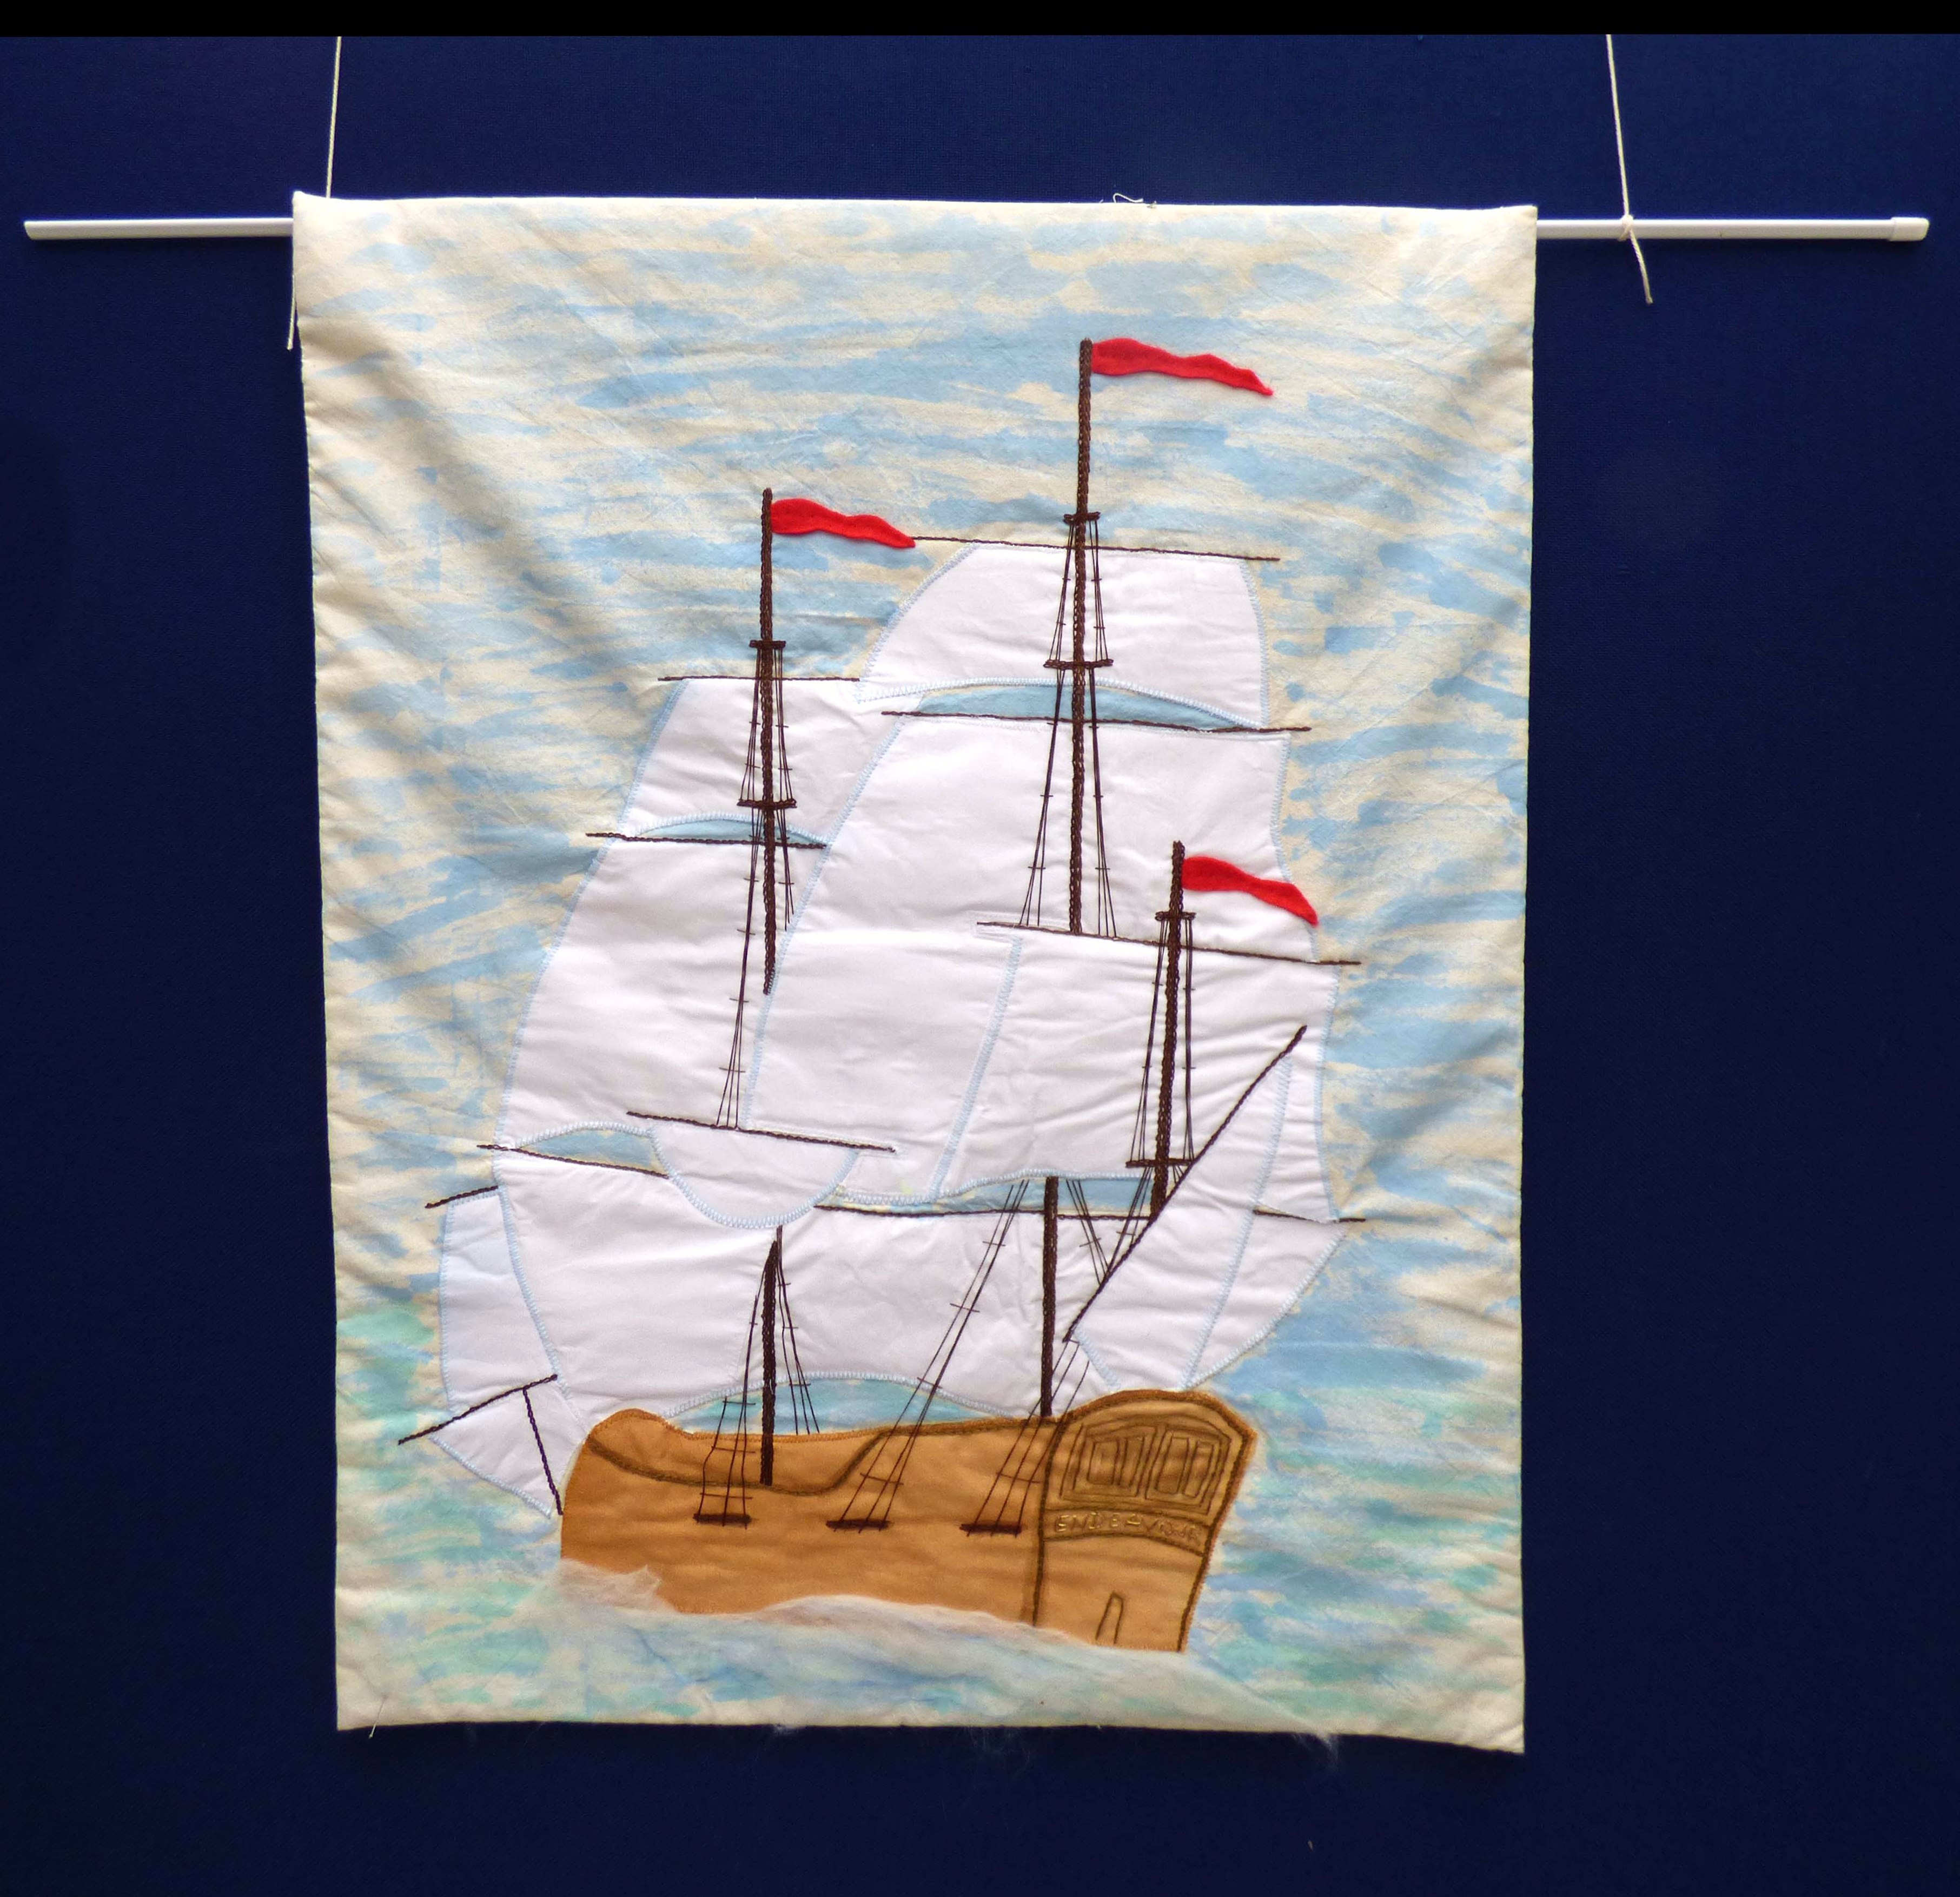 ENDEAVOUR, Young Embroiderers Group Project, Endeavour exhibition at Sefton Park Palm House 2019